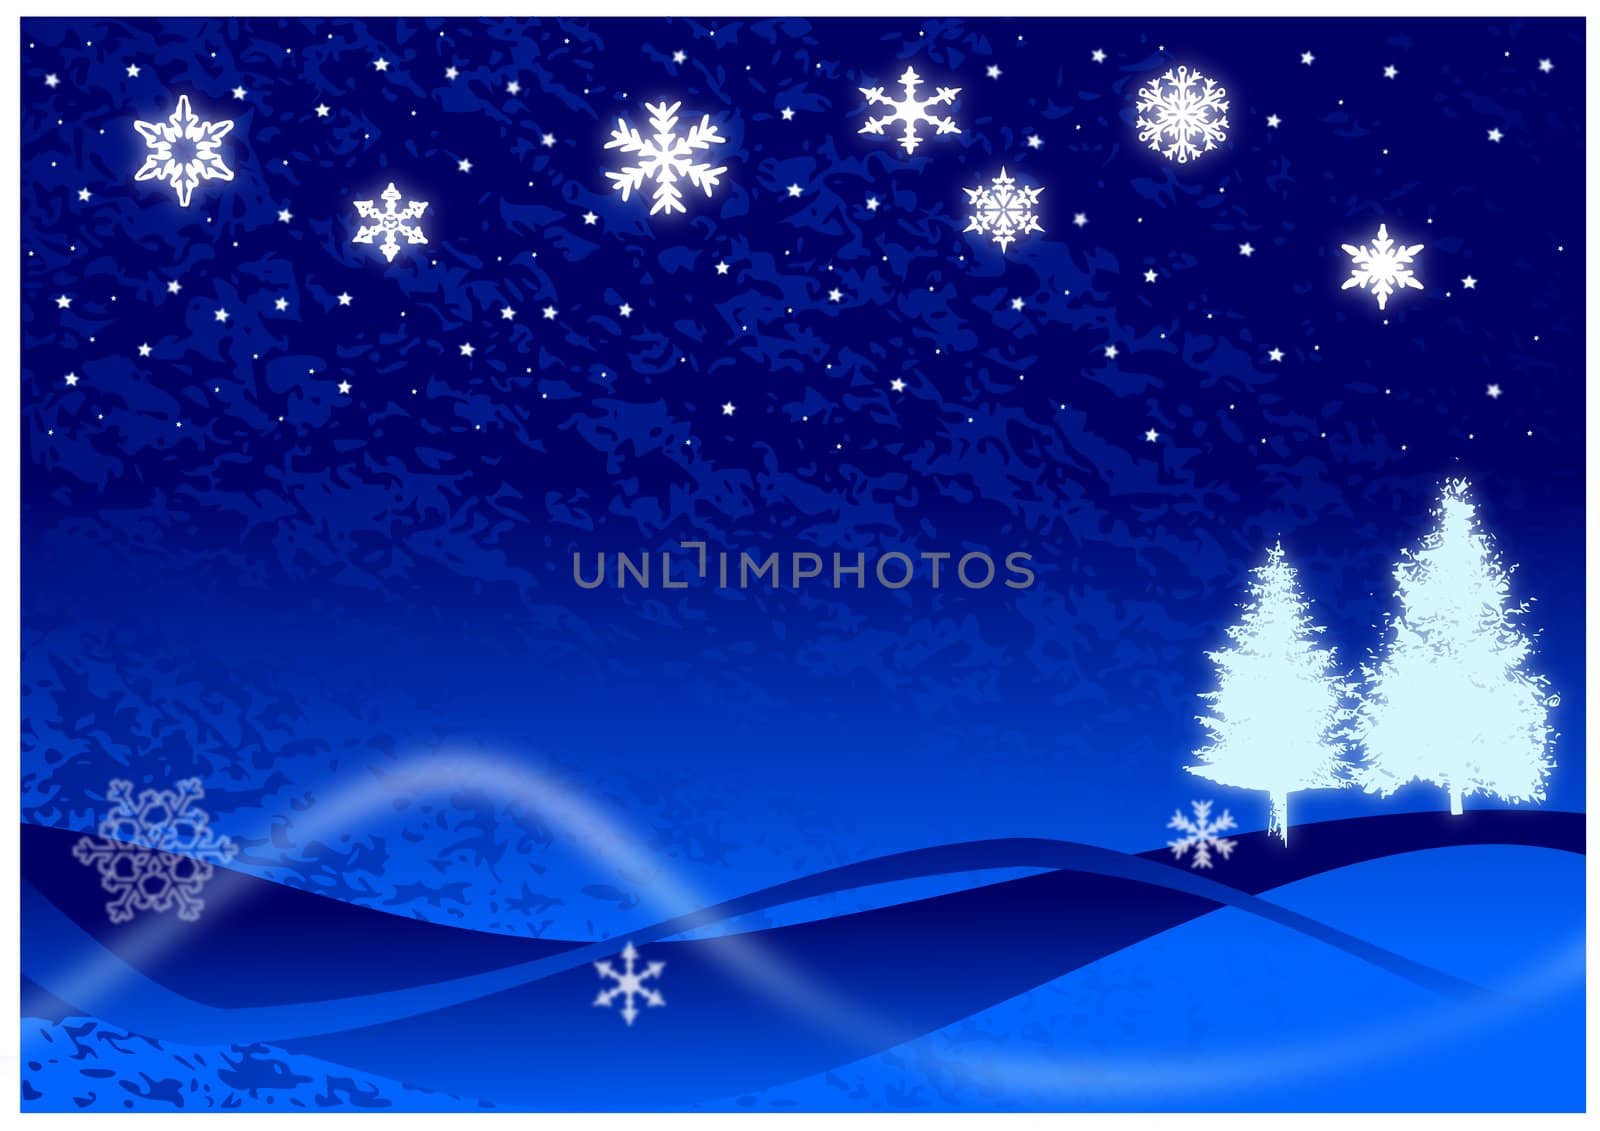 Christmas illustration of glowing snowflakes, Christmas trees, and stars with abstract snow drifts and blowing snow on blue.